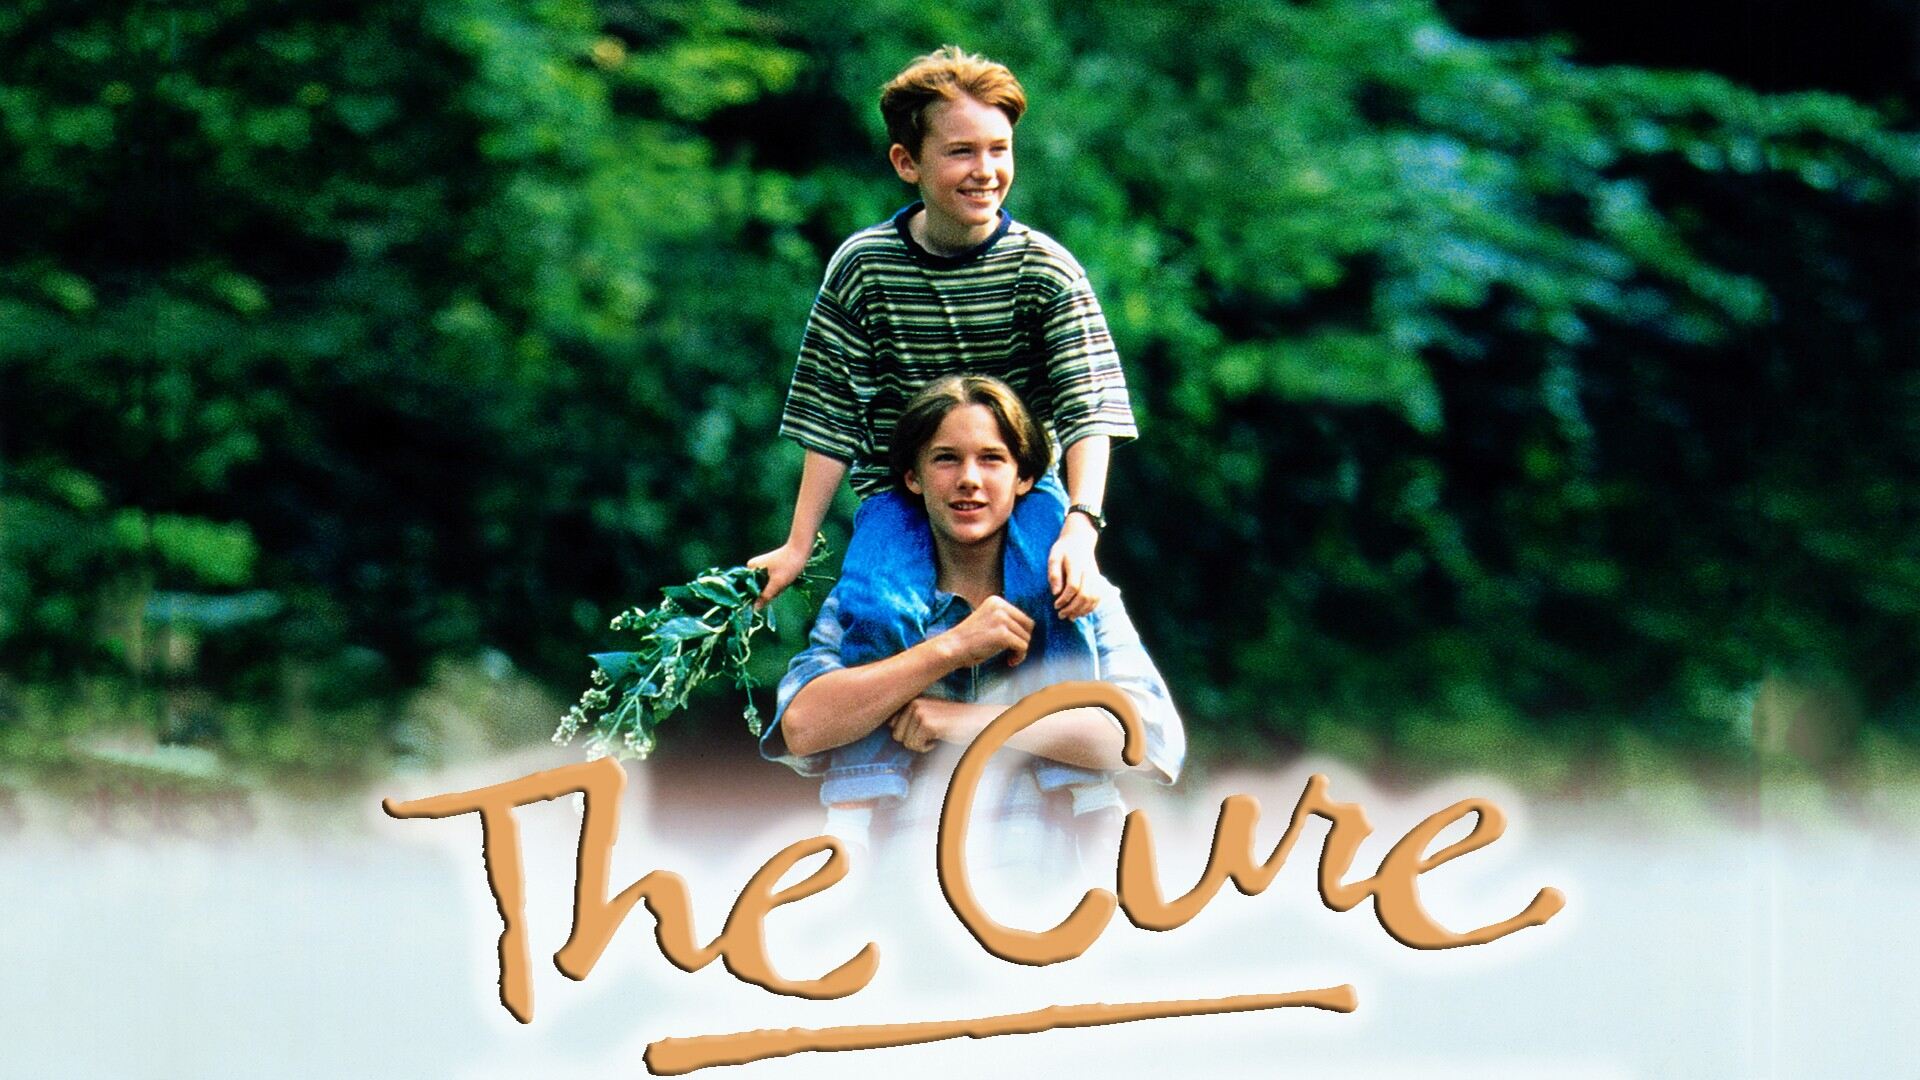 43-facts-about-the-movie-the-cure